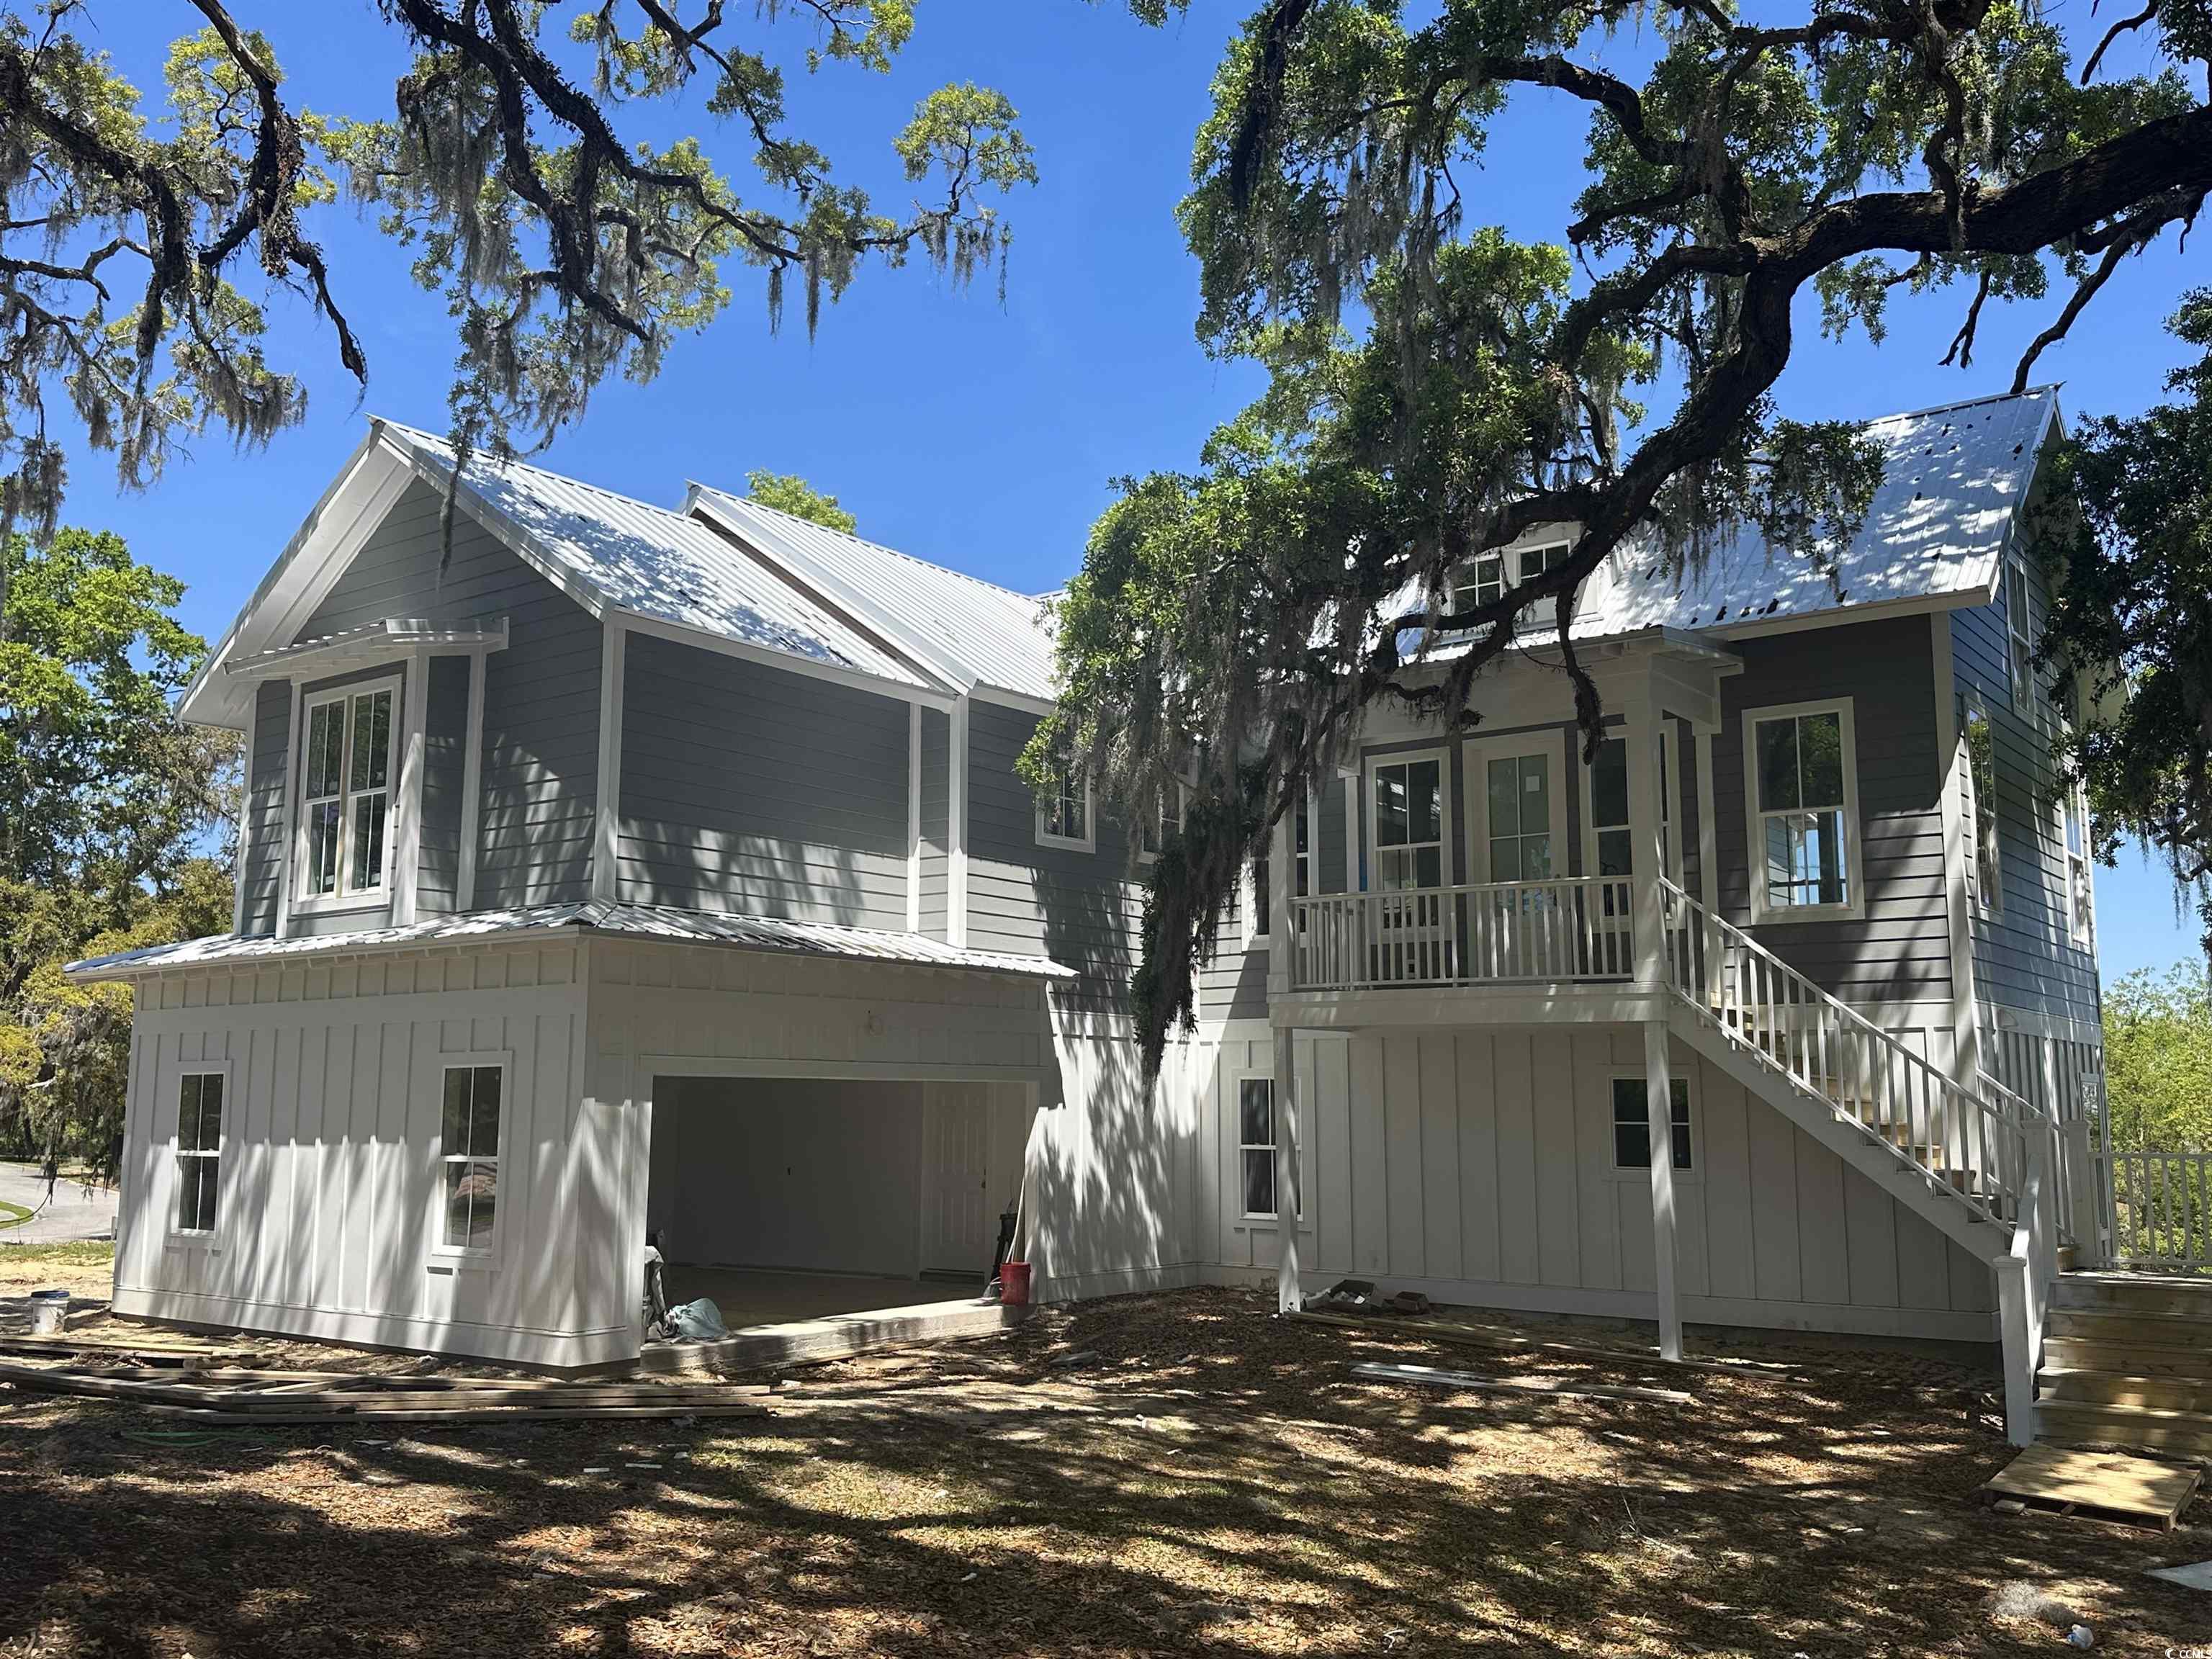 nearly complete and ready to be your new home!  amazing views of winyah bay, live oaks and unbelievable master suite!!  strategically positioned overlooking the winyah bay, this home takes advantage of the spectacular views while escaping being in a flood zone. nestled between two 300 year old heritage live oaks, this transitional 4 bed 3.5 bath has plenty of southern charm. the exterior has many details including metal roof and beams add to its lowcountry appeal.  brushed brass fixtures with a mid century modern flair and frigidaire appliance package make this kitchen a chefs dream.  feel like you are on an endless vacation in the owners suite, with a 14x12 custom walk-in closet with island.  the owners bathroom continues pouring on the charm with beautiful tile and a free floating tub tucked in its own cubby for some relaxation time.  downstairs are 3 bedrooms, two bathrooms, living room/den and a mudroom with laundry area.  the living room will have cathedral ceilings with beams and a porch with amazing views of winyah bay!  this home is constructed to withstand even the strongest storms.  other features include tankless hot water heater, tile showers and lots of parking/storage.  south island plantation is a gated community full of live oaks on winyah bay at the southern end of georgetown.  it is less than 60 miles to historic charleston, sc and 40 miles to myrtle beach.  just a few miles to georgetown's front street with boutique shopping and dining.  this community has a beautiful clubhouse with a fitness center, an outdoor pool and outdoor walking and biking trails!